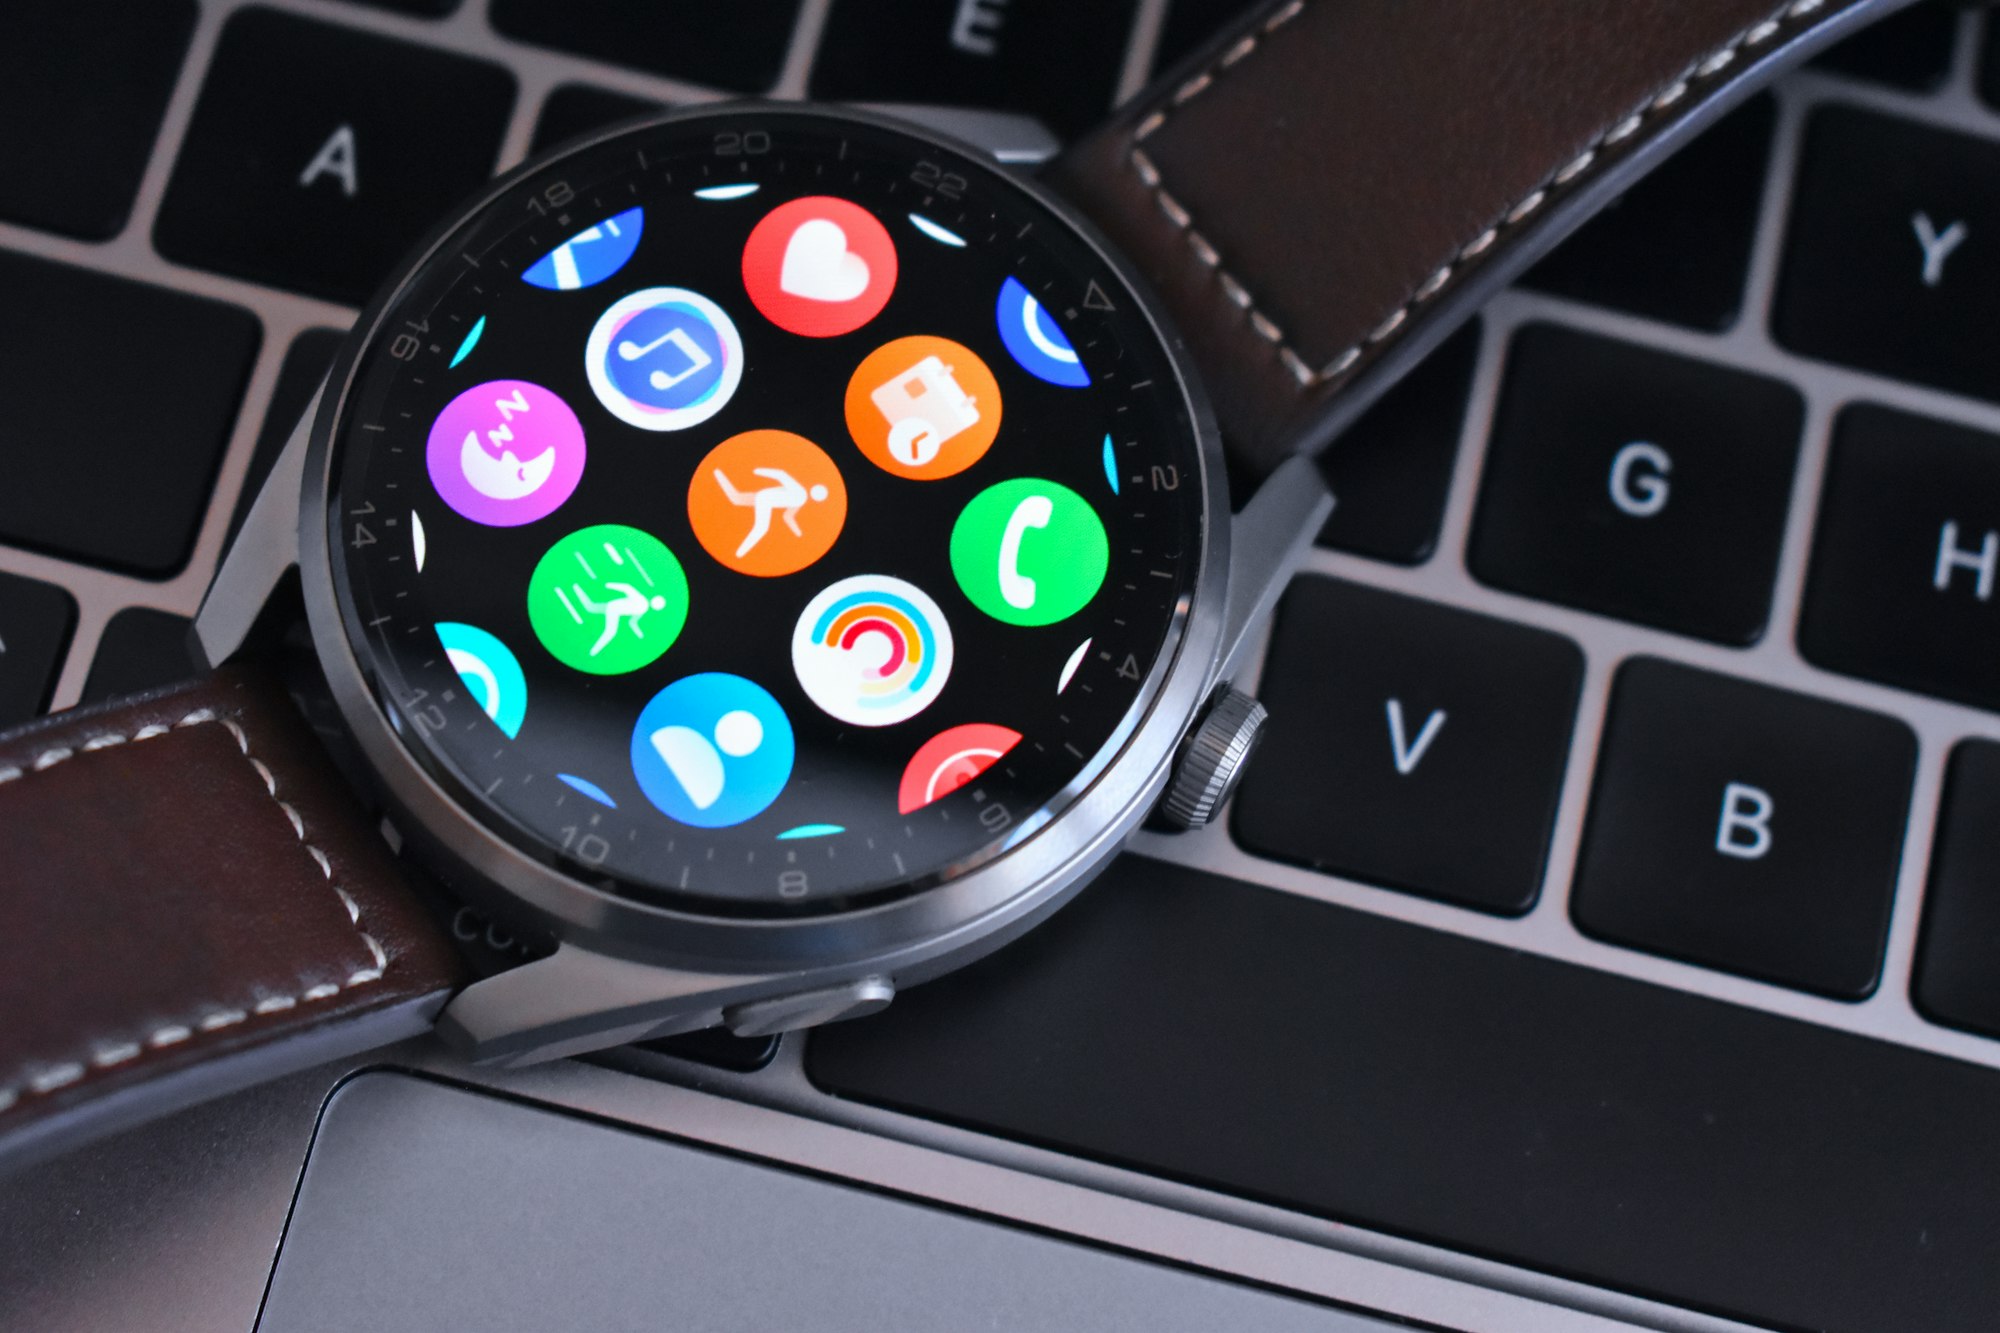 How to Receive and Send Text Messages on a Samsung Galaxy Watch